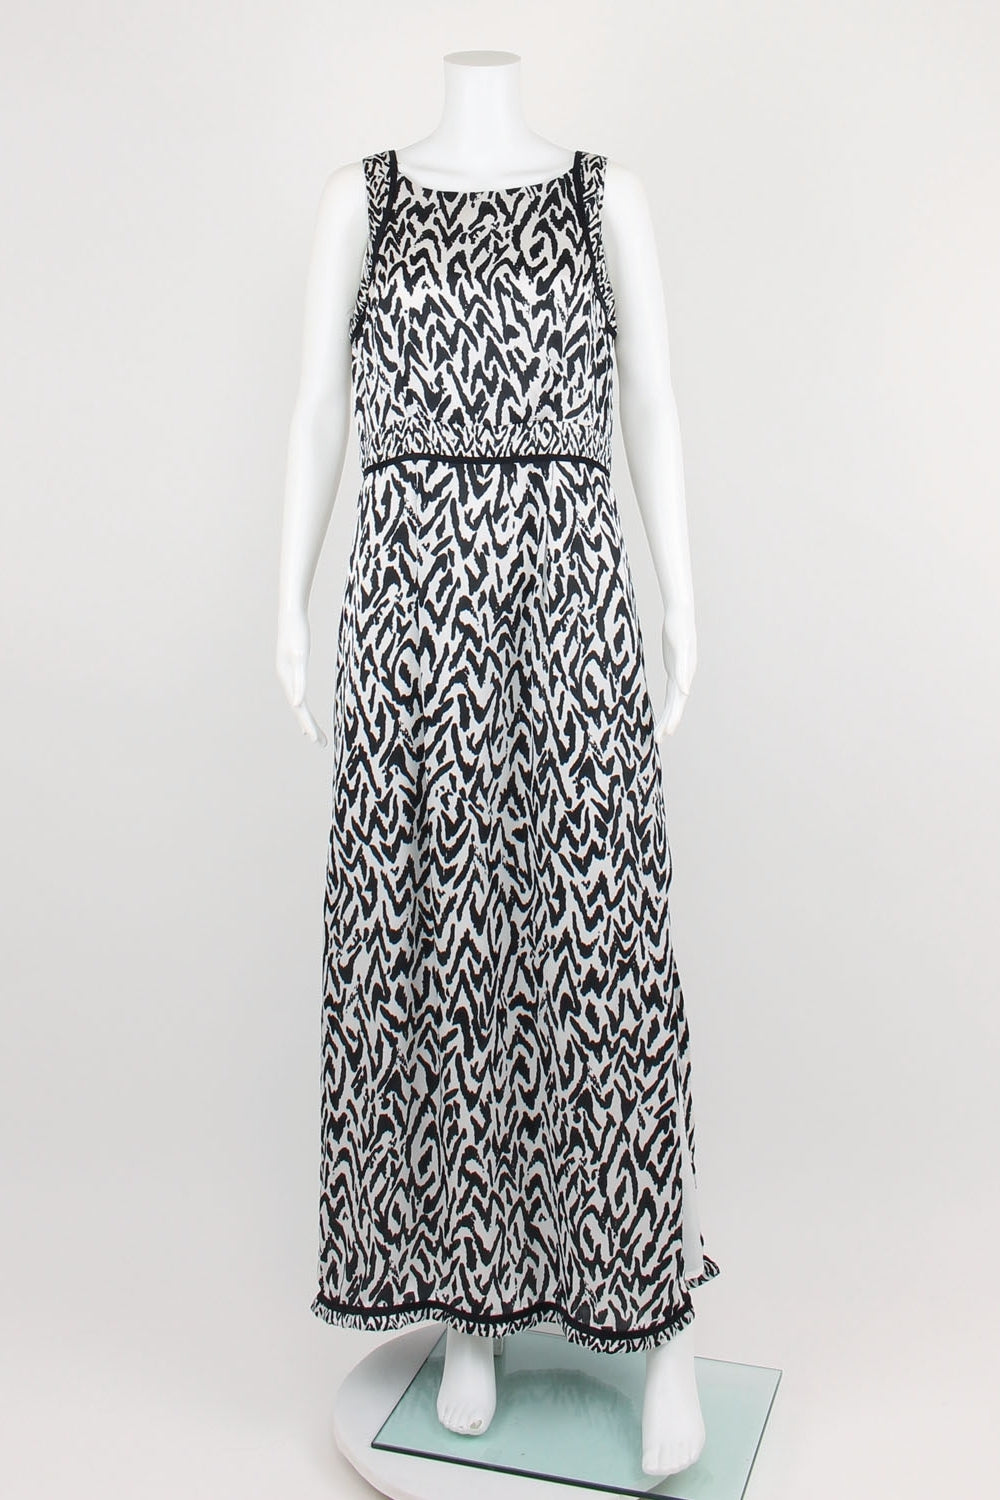 Peter Morrissey Black And White Patterned Maxi Dress 12